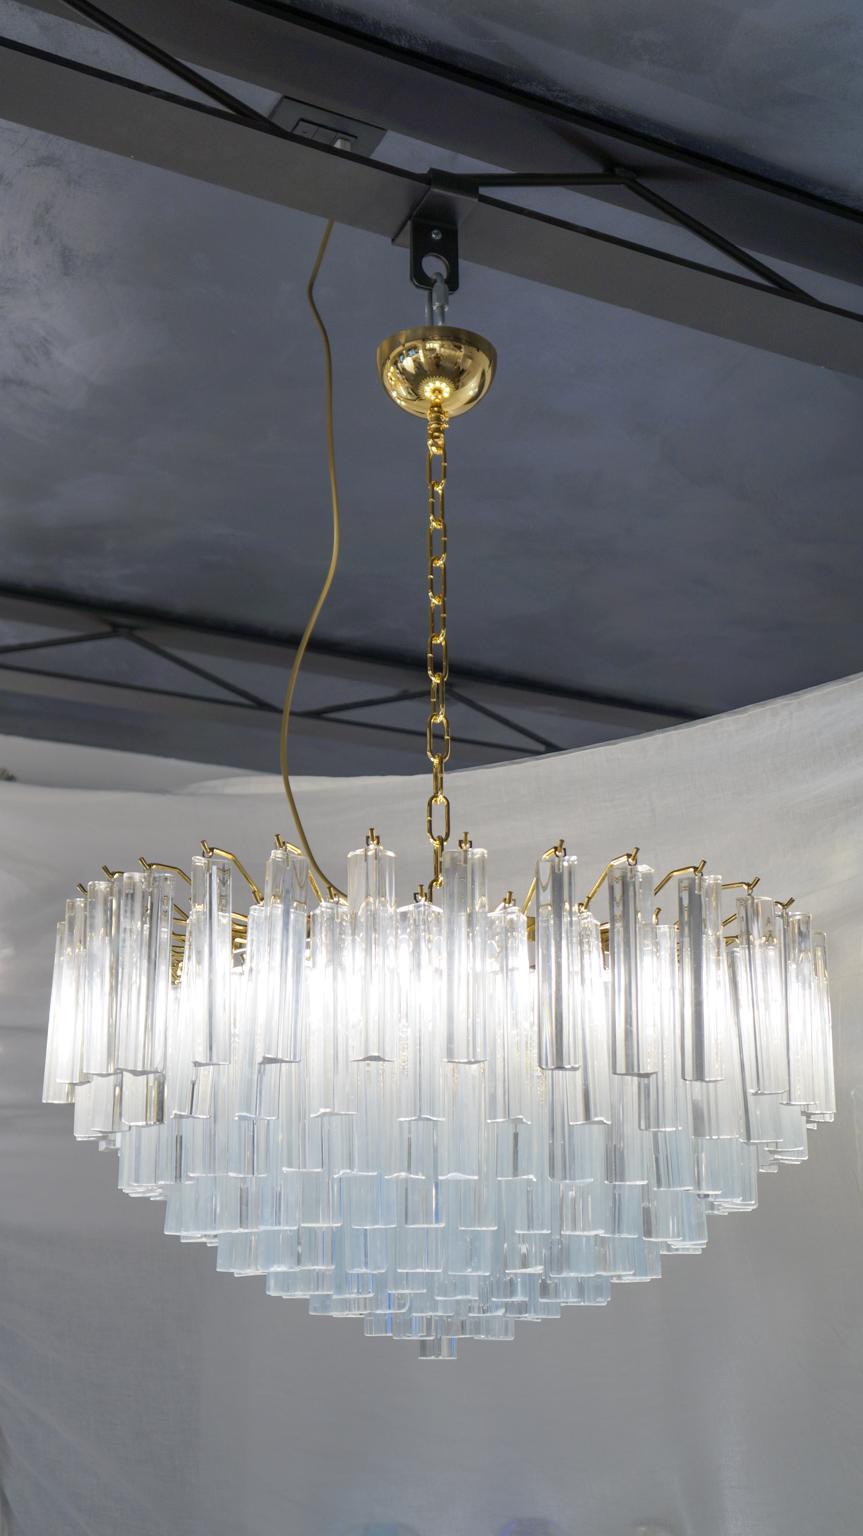 Murano blown glass chandelier with 169 elements in antique crystal, gold finish structure and 9 lights E26 / E27. The elements of this typical chandelier are called Triedri, for its triangular shape. The assistants take a small quantity of glass